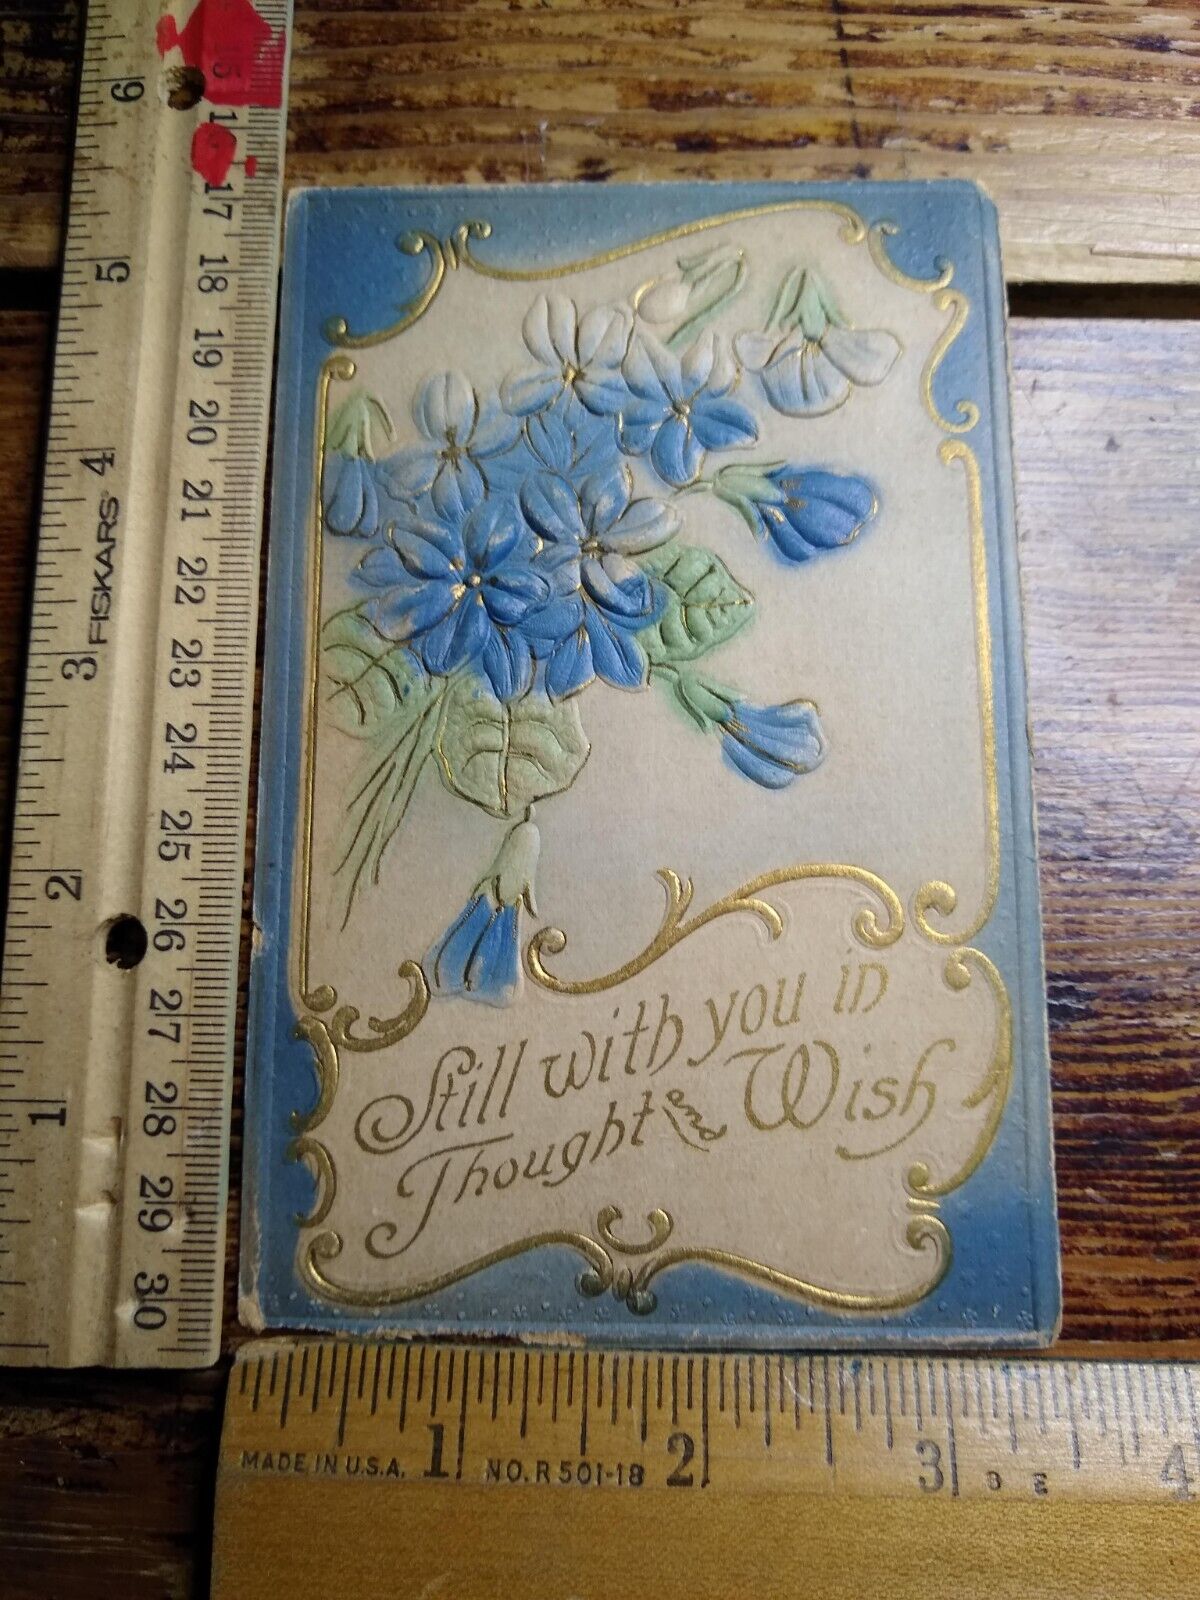 Postcard - Still with you in Thought and Wish with Flowers Embossed Art Print